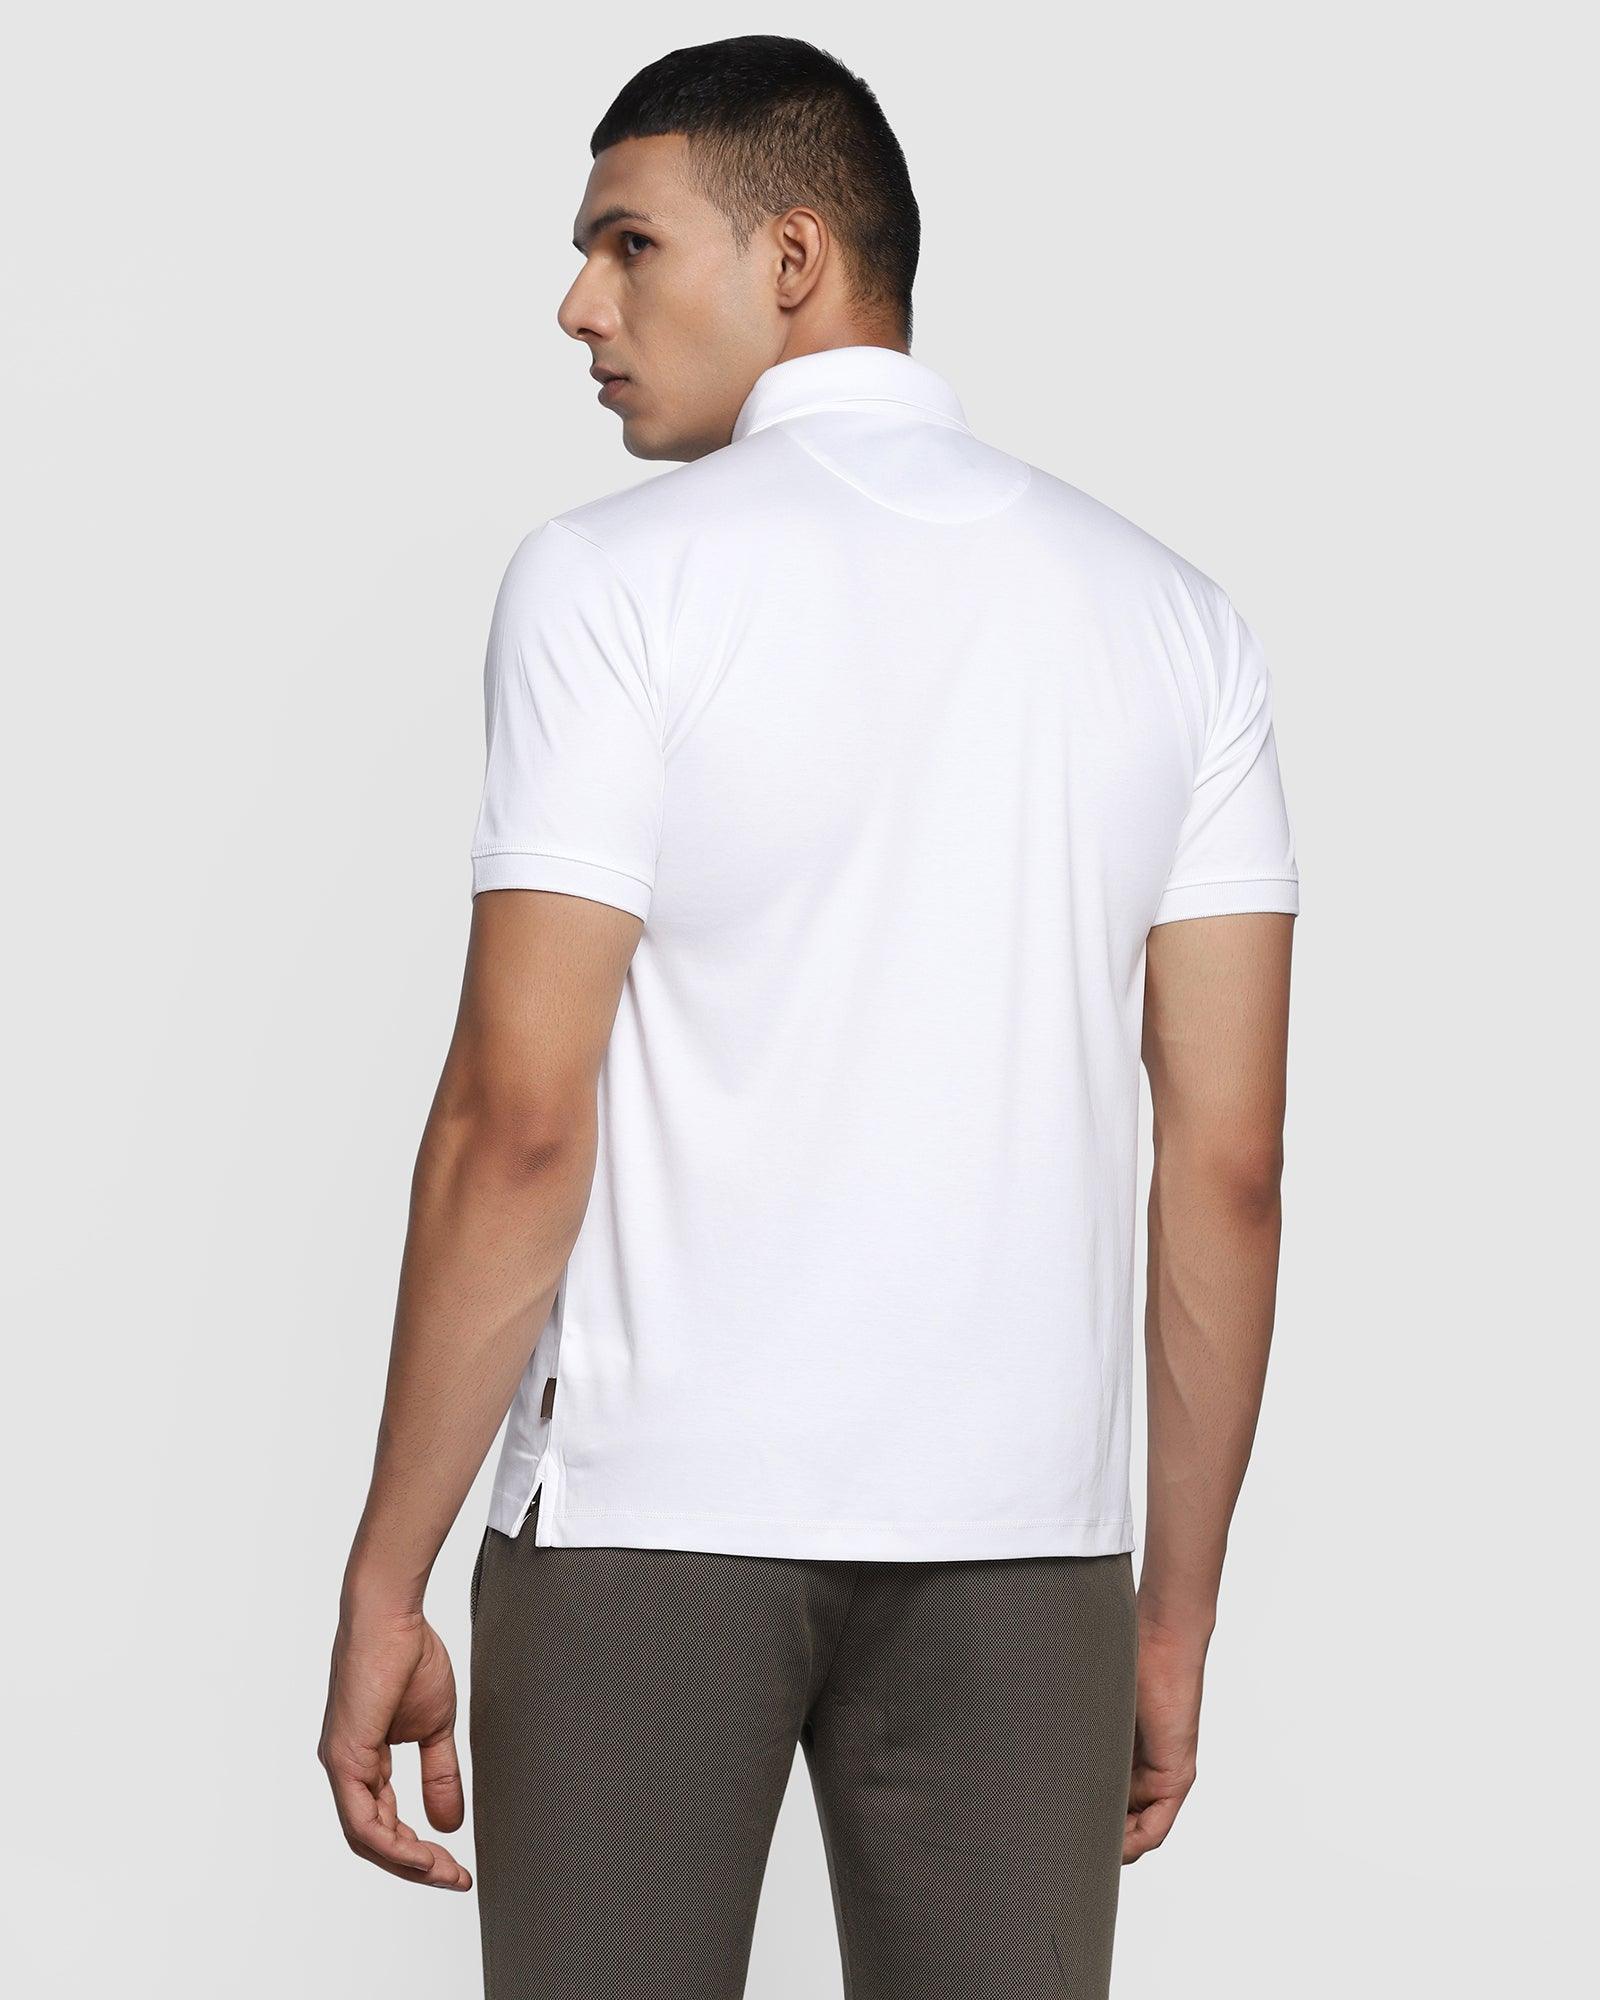 Polo White Solid T Shirt - Toll